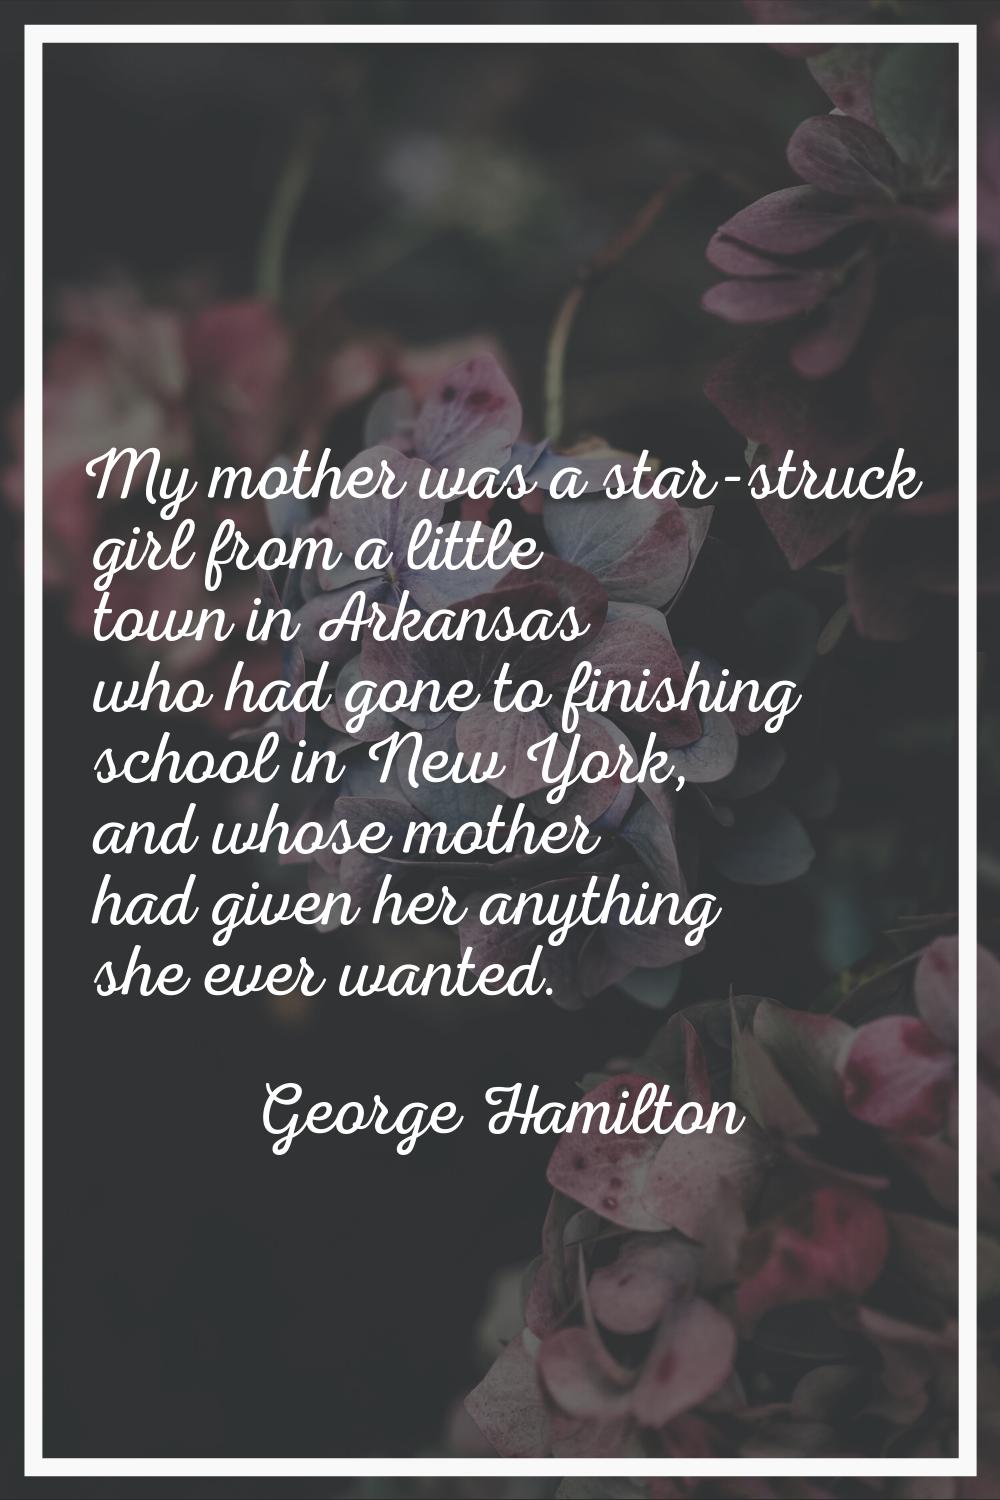 My mother was a star-struck girl from a little town in Arkansas who had gone to finishing school in